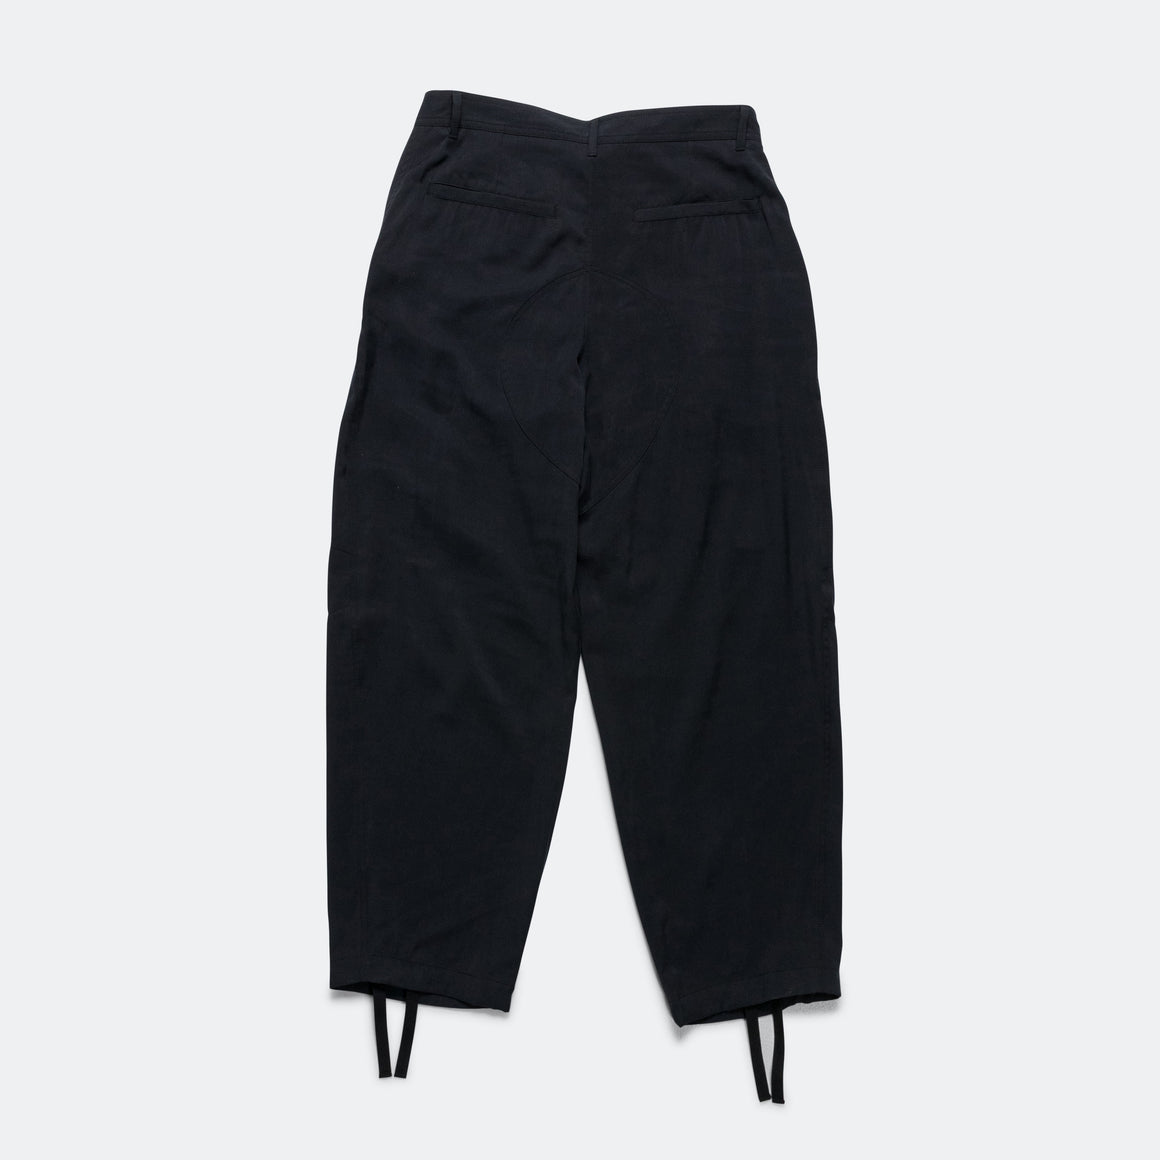 Over Pant - 10oz Black Viscose/Poly Twill